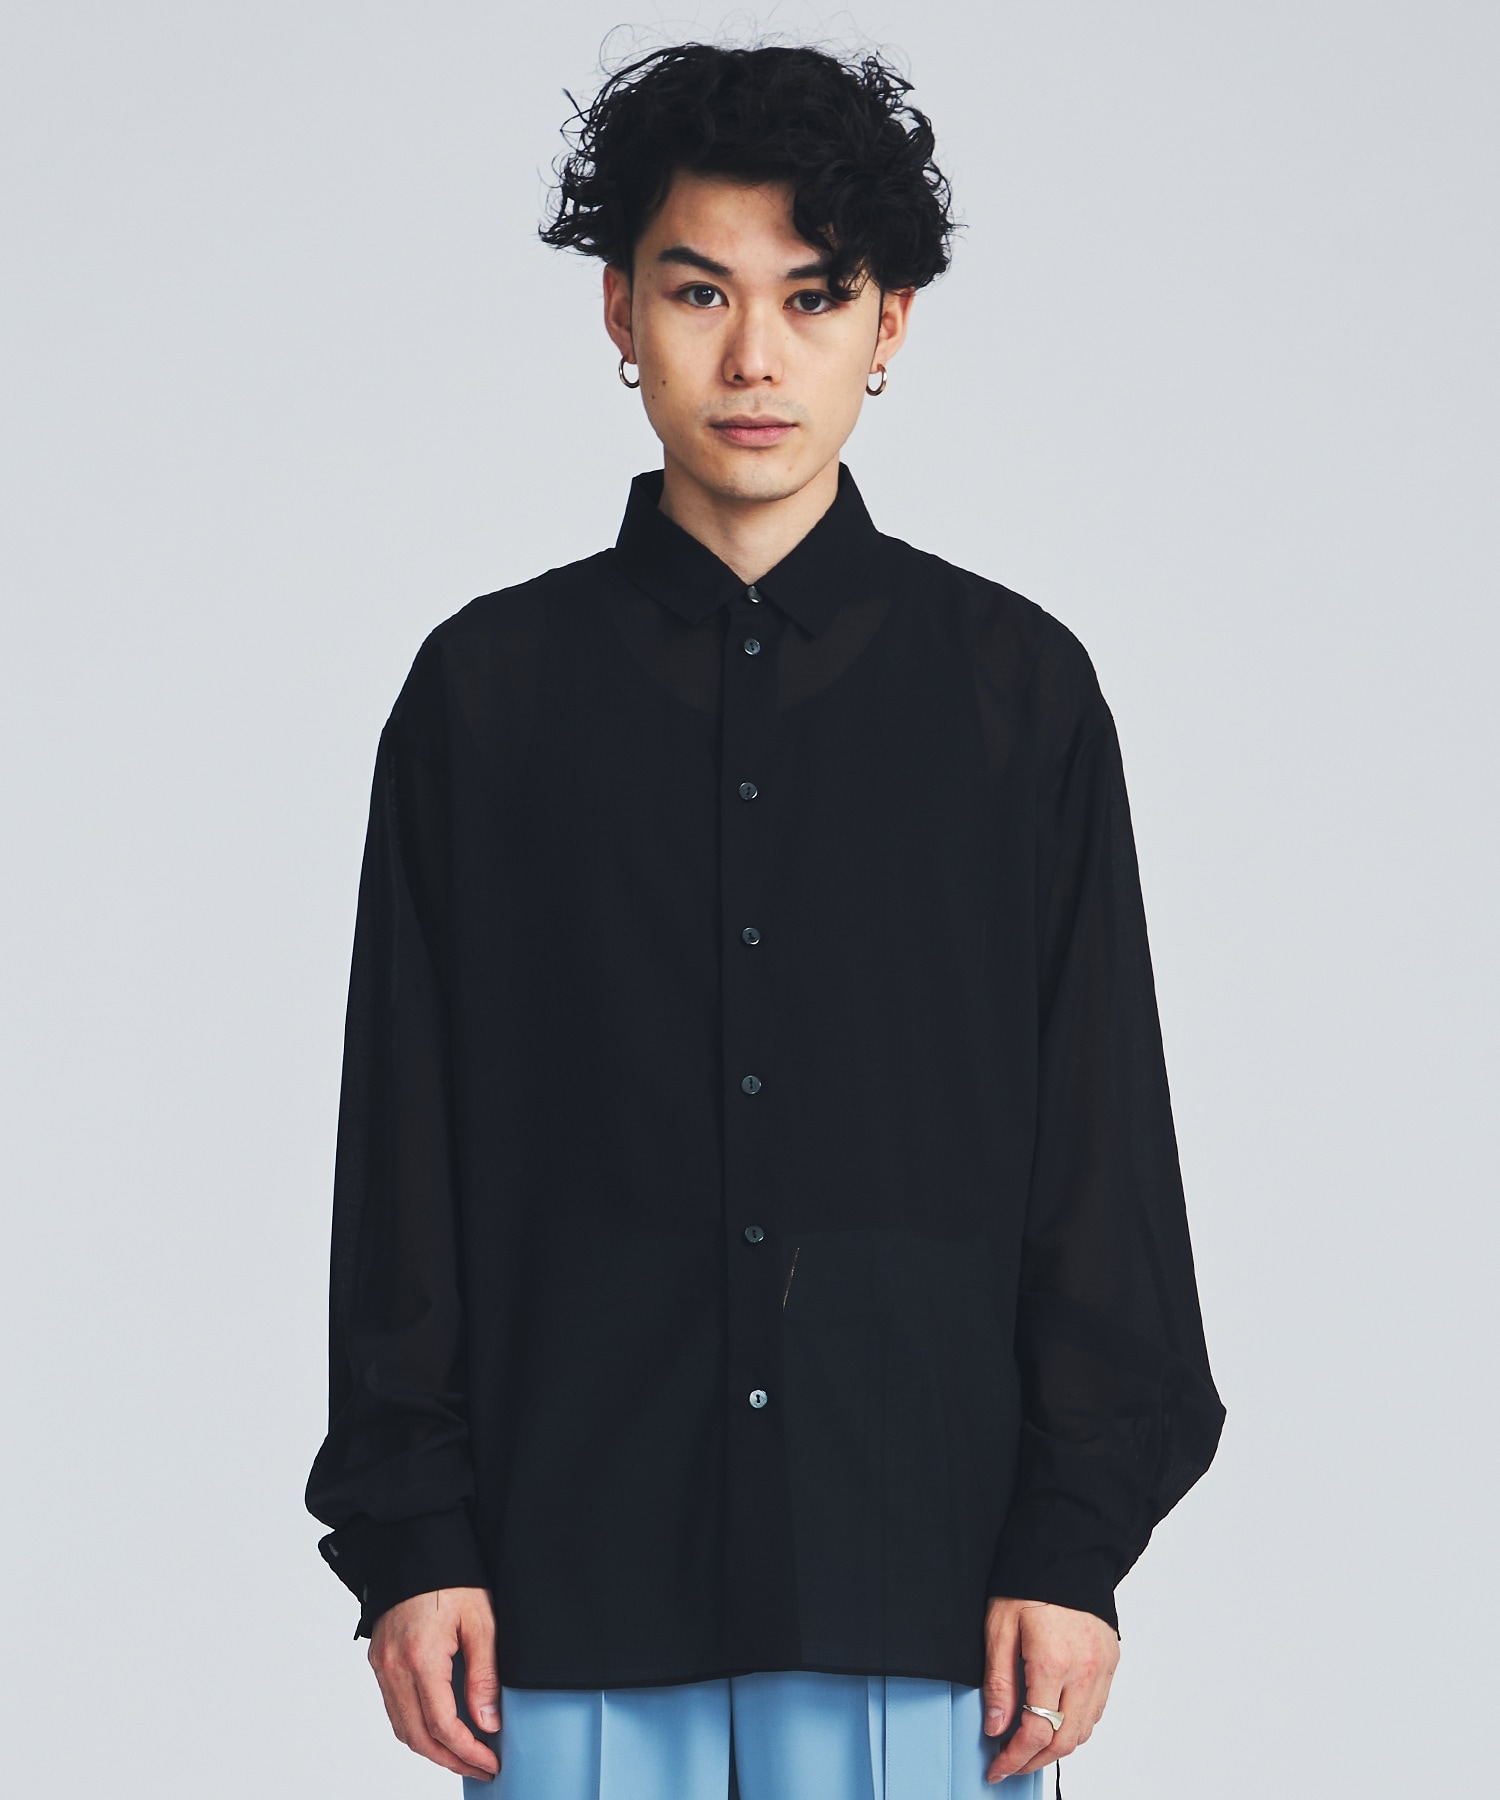 WOOL VOILE SHEER L/S SHIRT